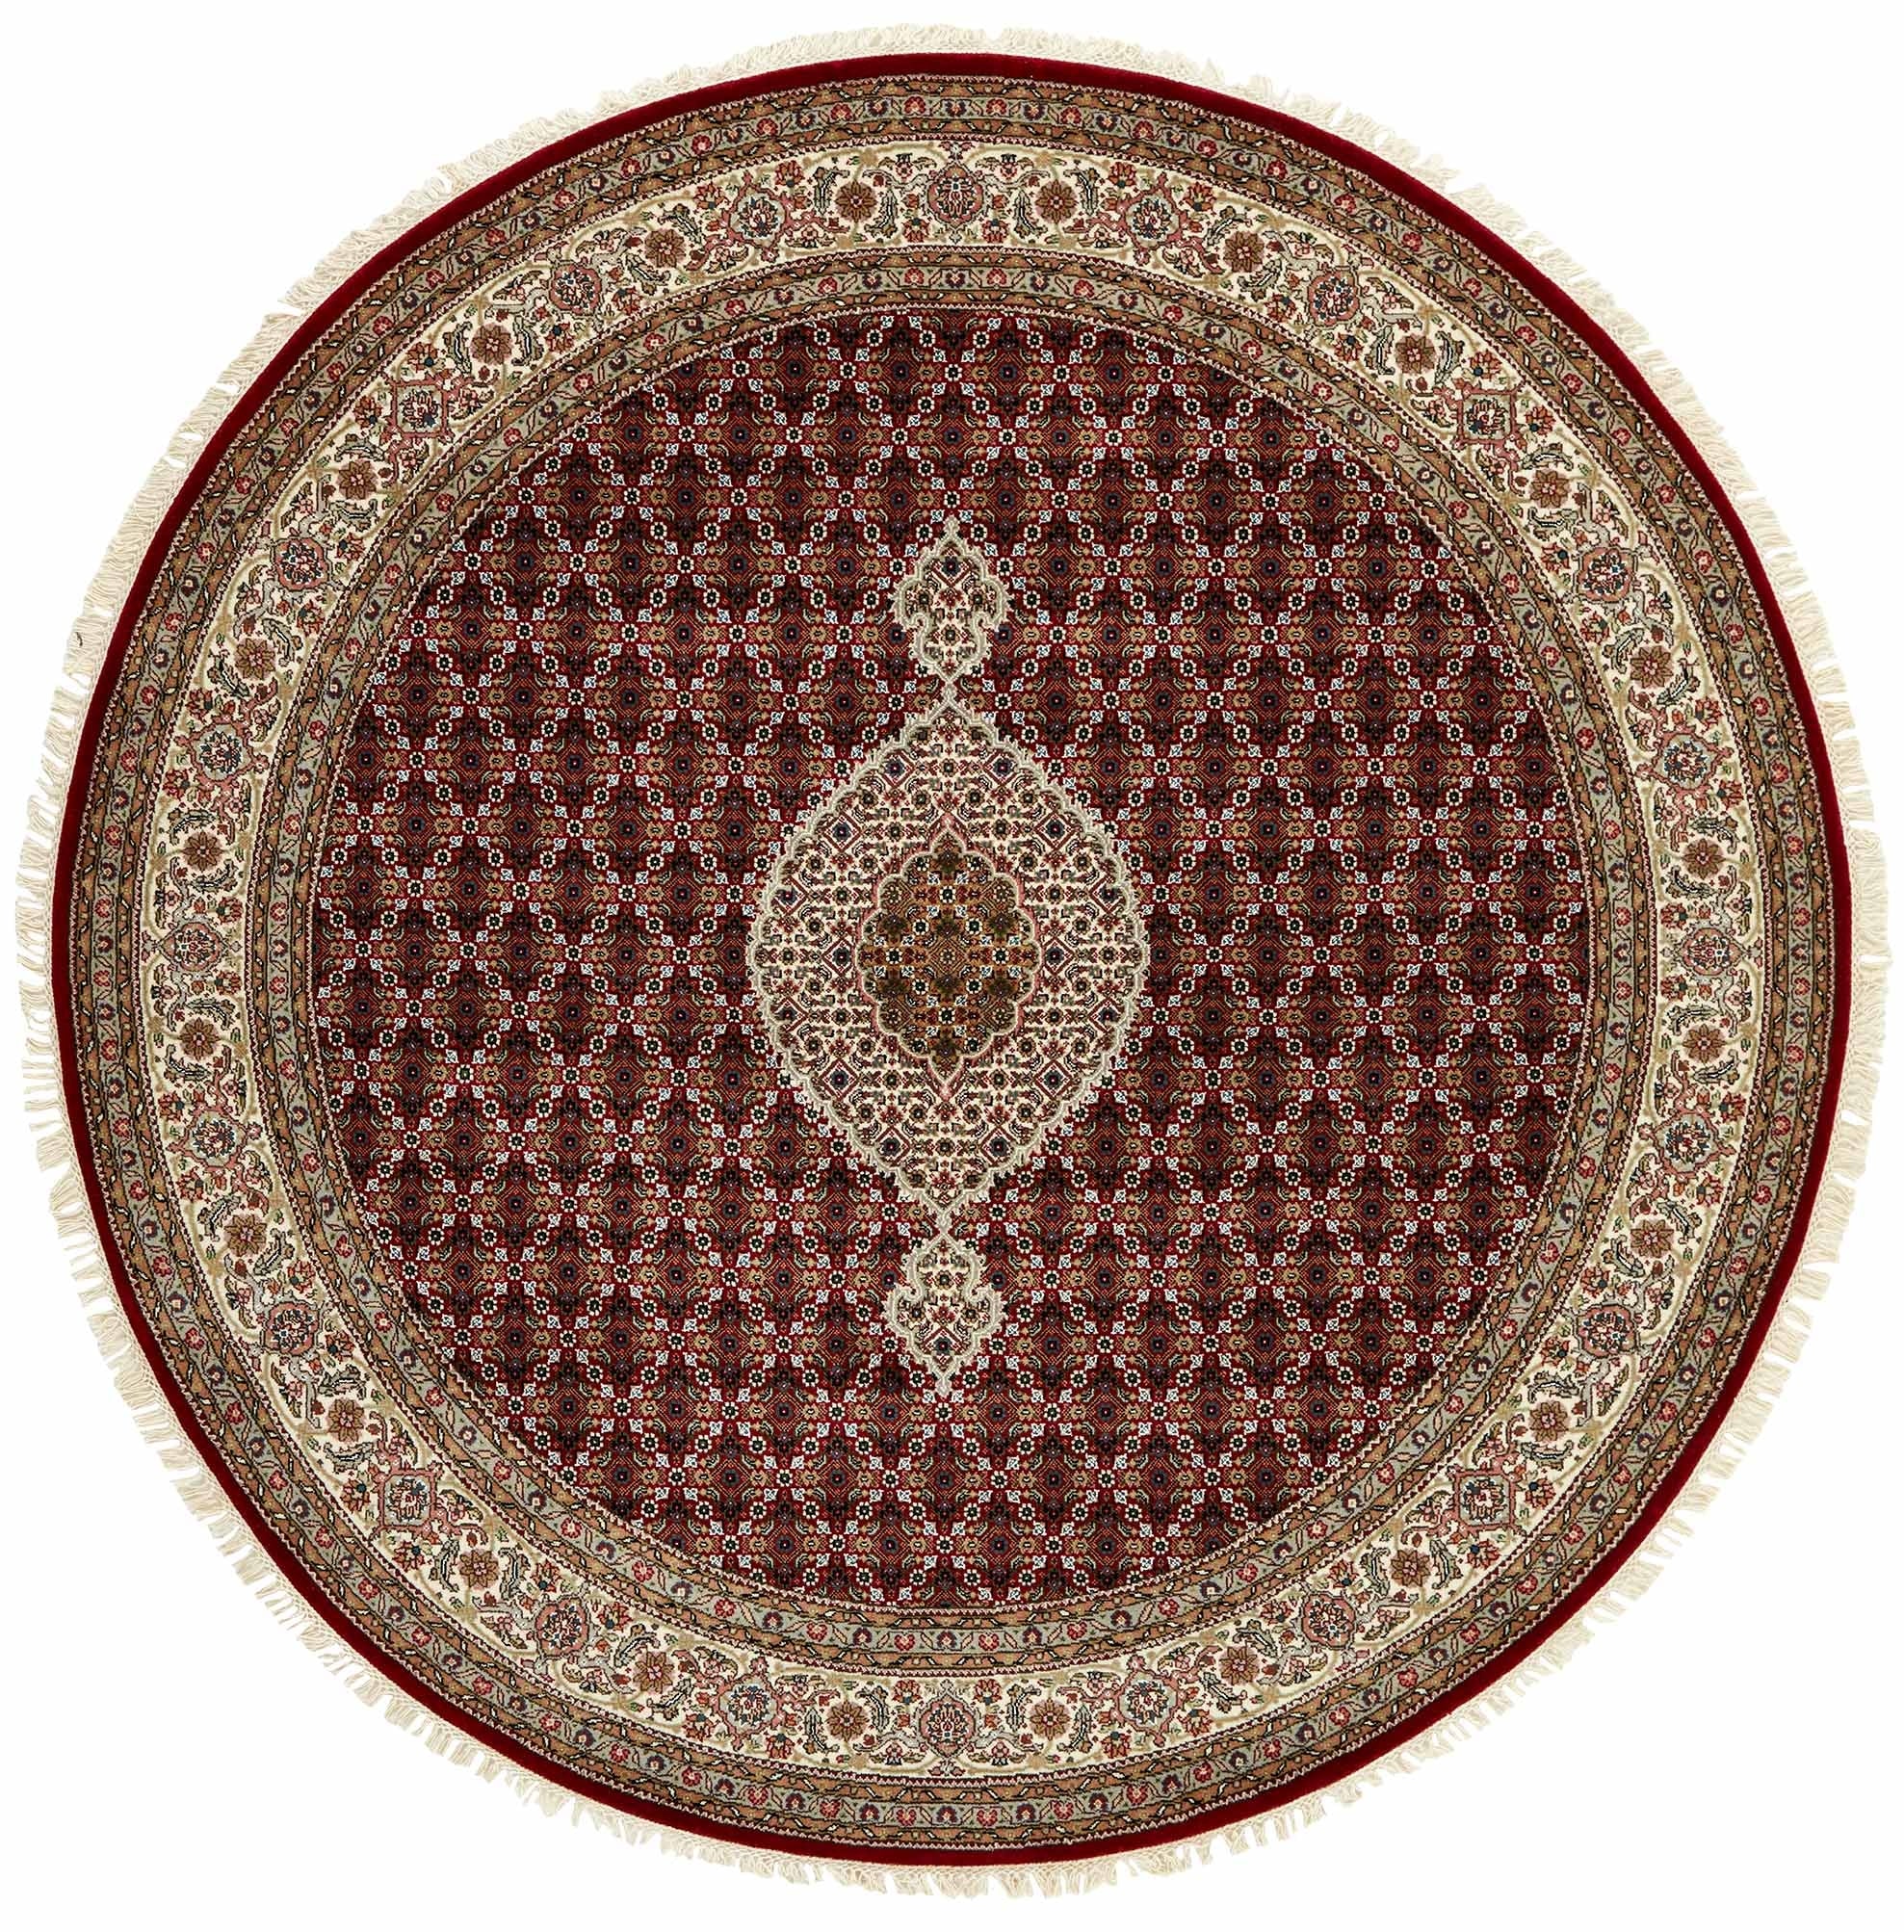 authentic oriental circular rug with traditional geometric and floral design in red, blue, green, beige, brown and black